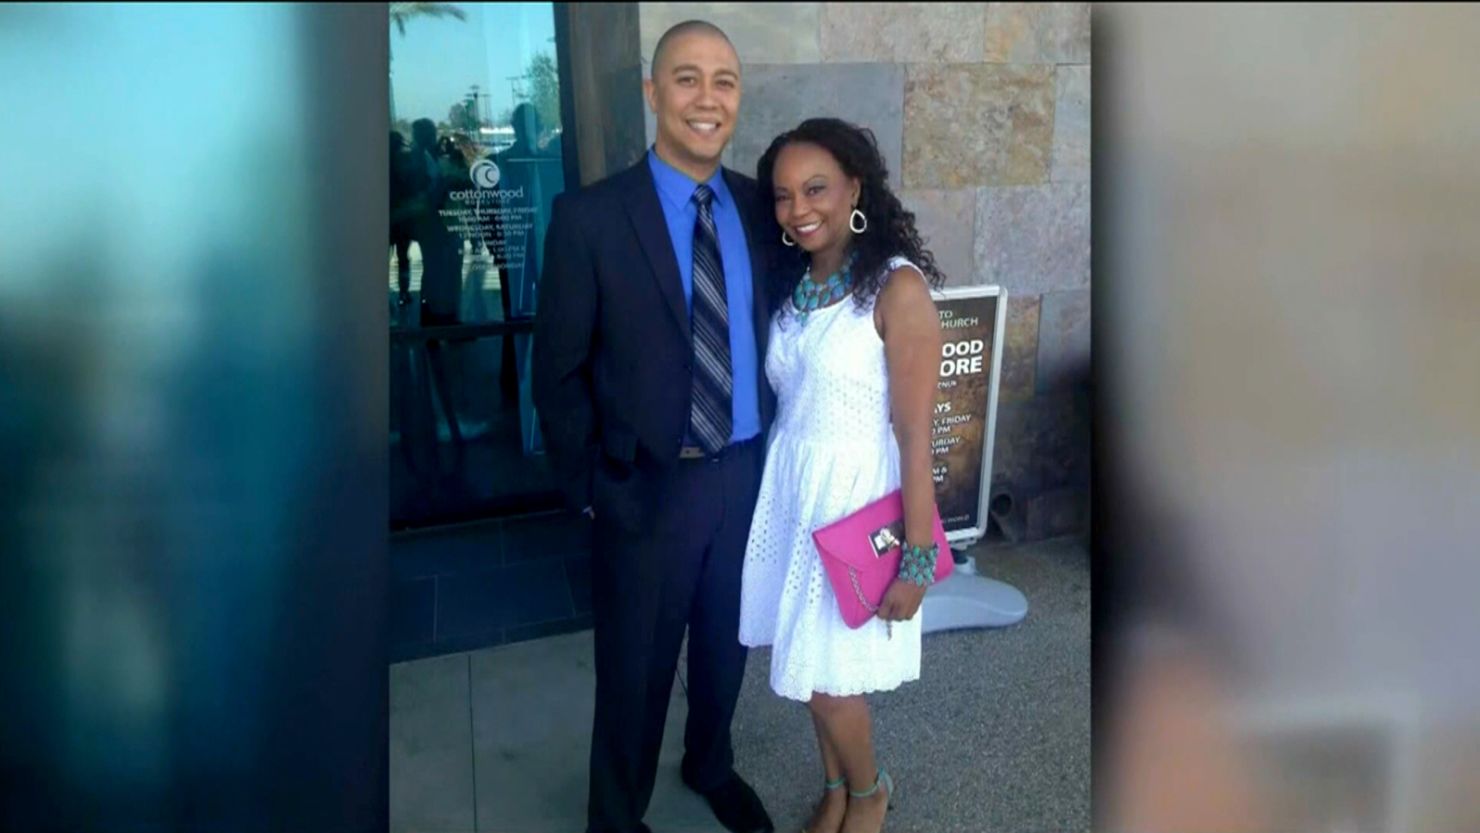 Christopher Eisinger, left, is pictured with mother Katrina. Eisinger died in 2018 following an altercation with police in Anaheim, California.